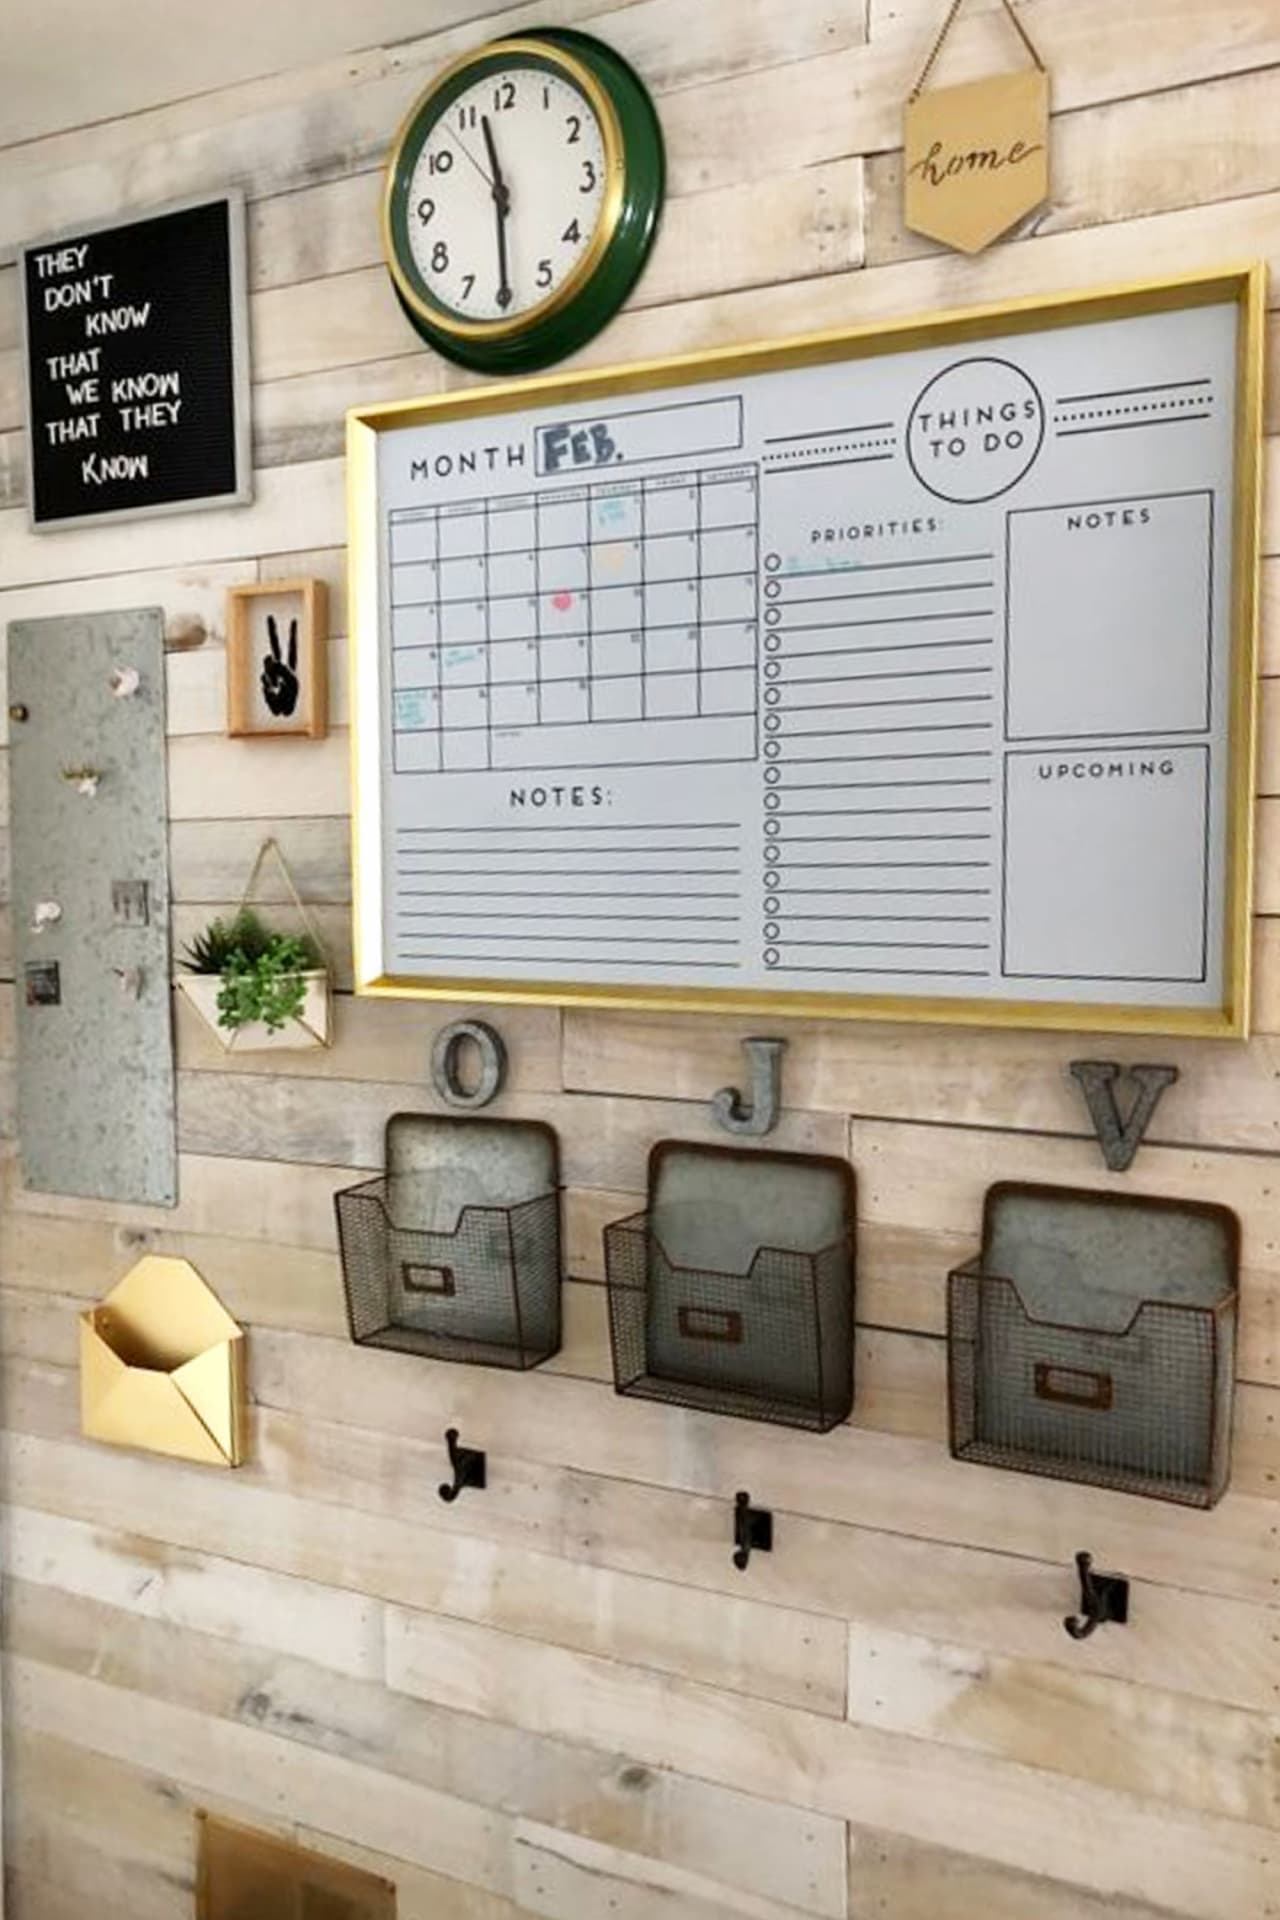 Home Command Center Ideas (LOVE the pallet wall - so rustic farmhouse looking!) How to make a home command center or family organizaton center on your wall.  These easy DIY family command center wall ideas are so helpful for getting organized and STAYING organized (and they're pretty too!)  Add some family command center printables, baskets, shelves, chalkboards and a calendar and you're all set!